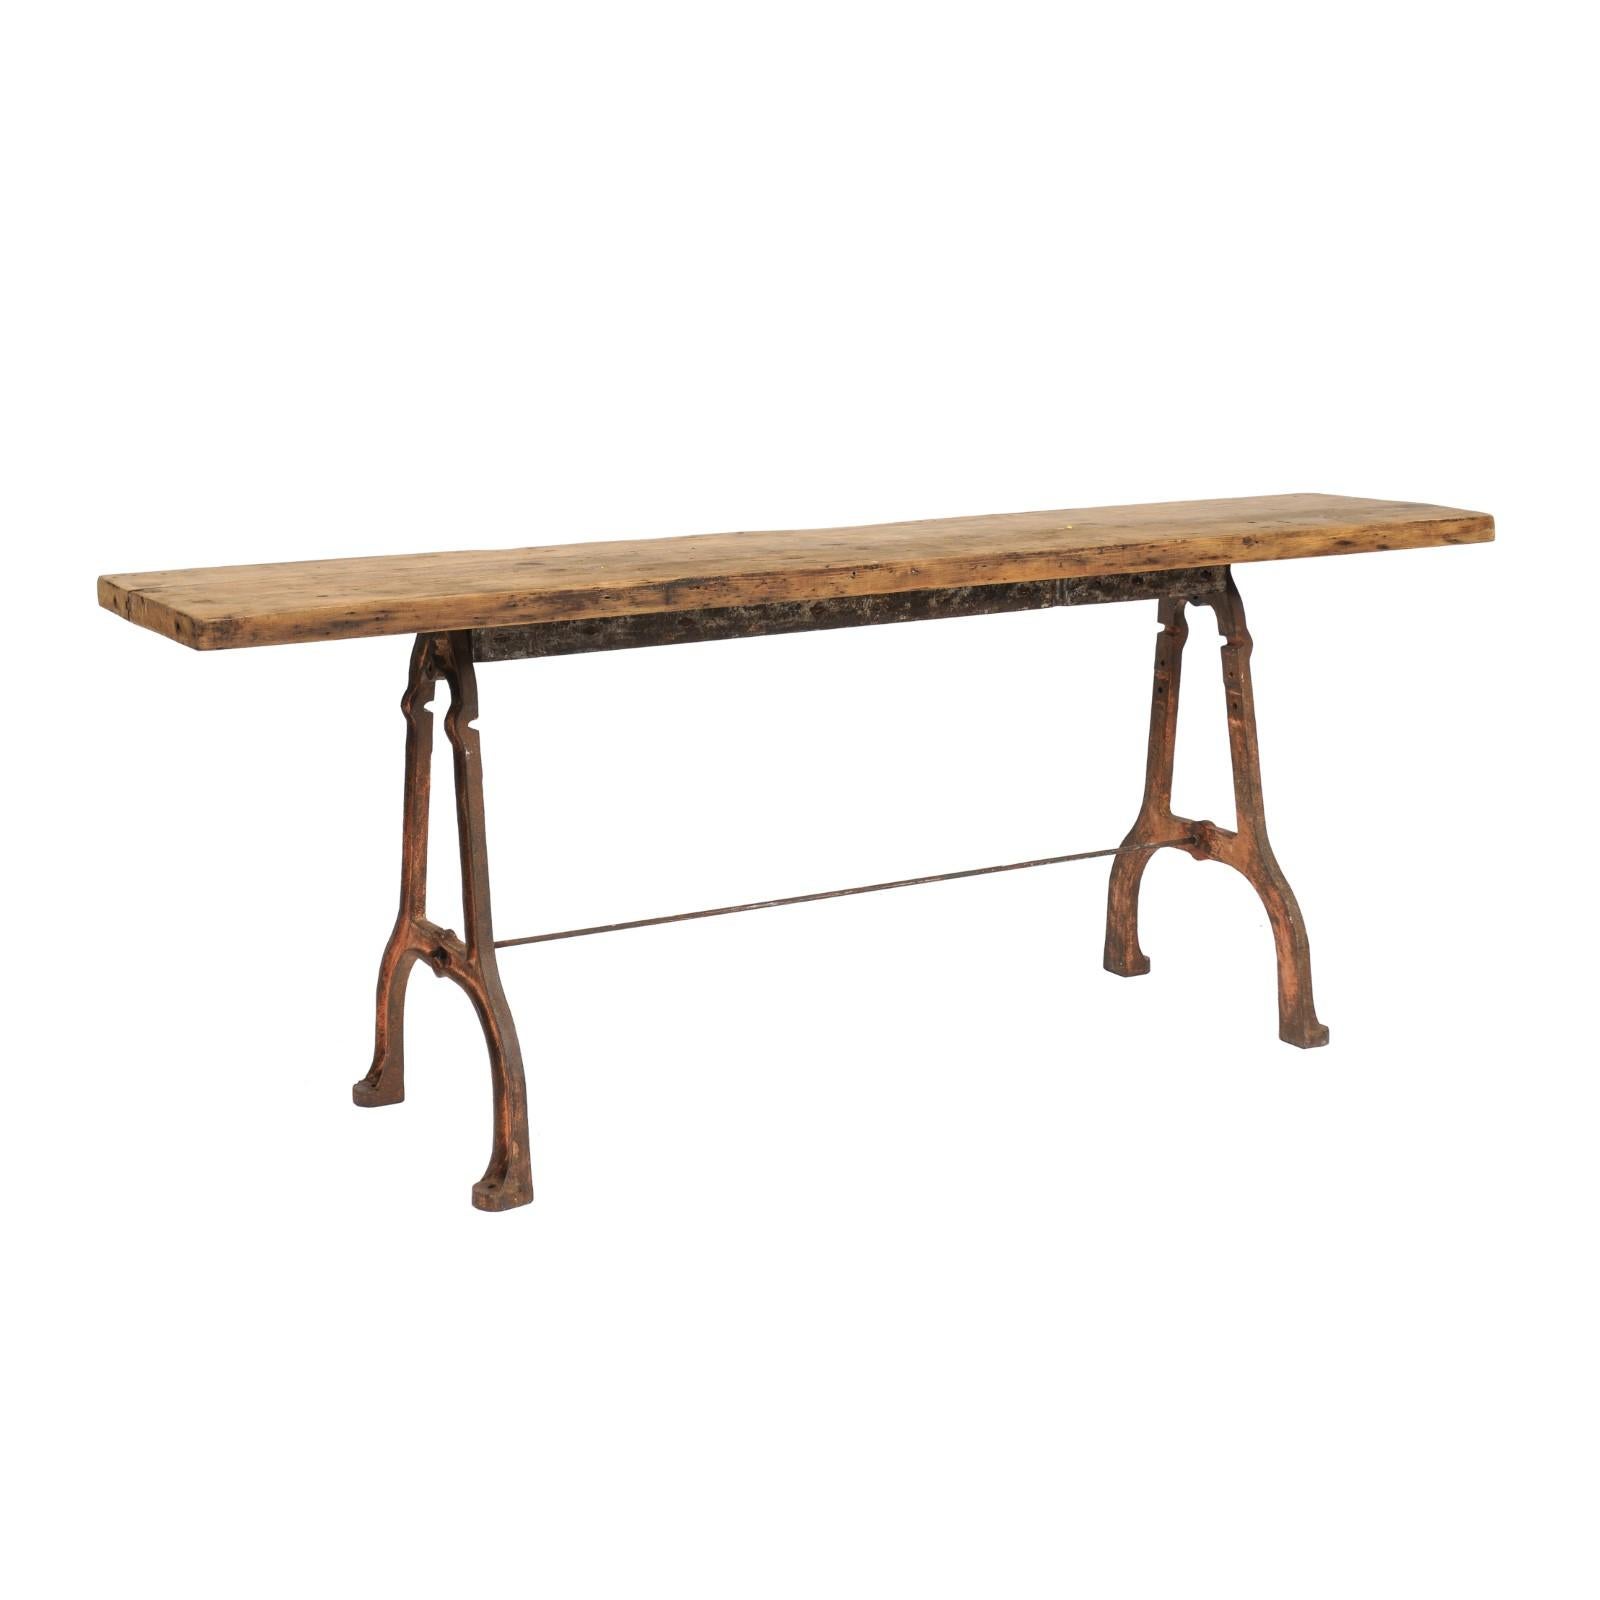 Southern French Long Iron and Oak Rectangular Console Table from the 1940s